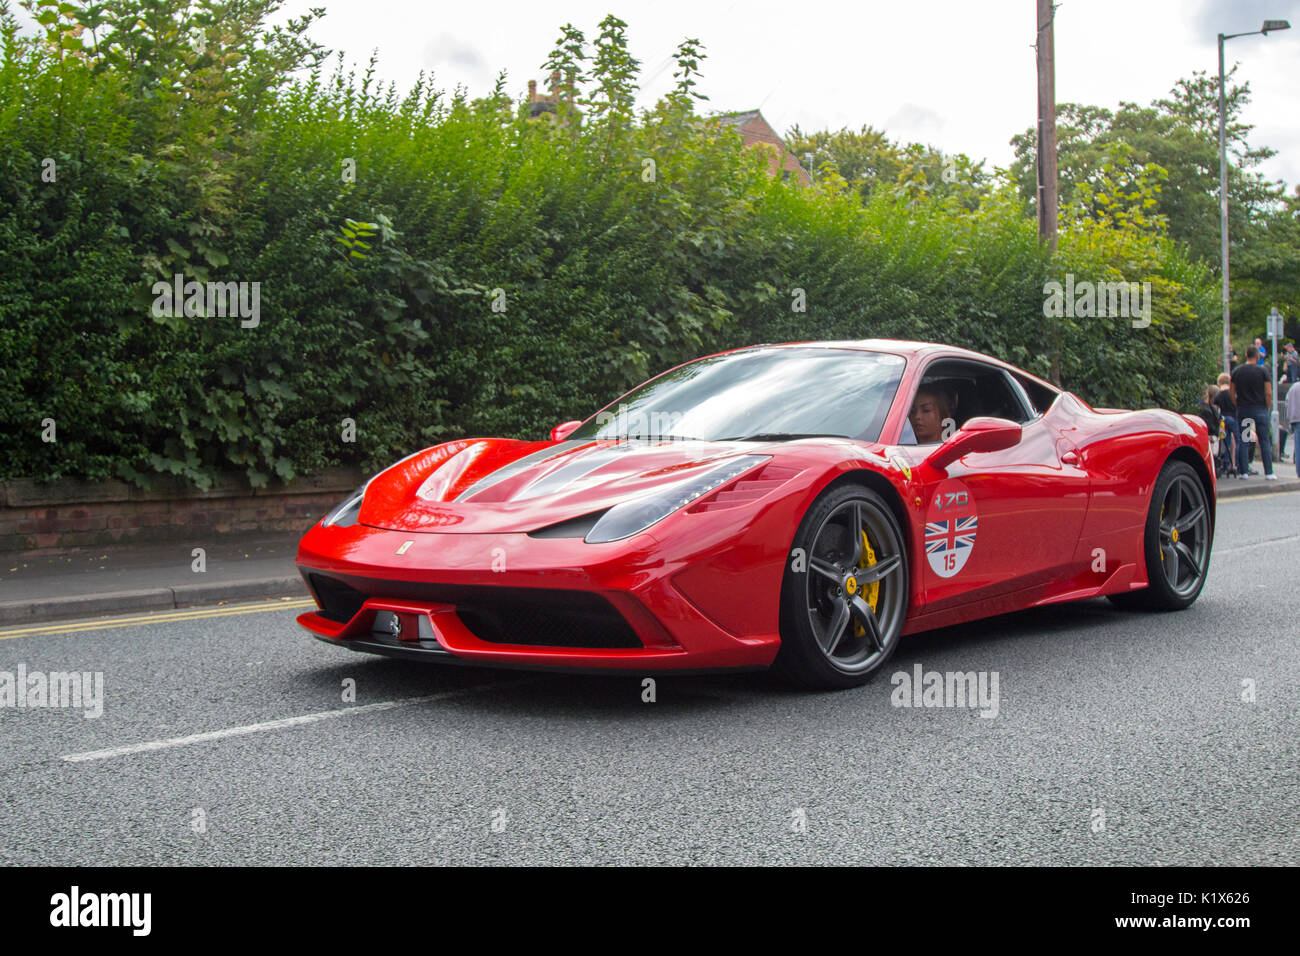 The 2017 Ormskirk MotorFest on Sunday 27 August. 300 vintage, Ferrari classic Ferrari 458 Speciale AB S-A & cars from all eras of motoring lined up on town centre streets and in Coronation Park for people to admire. Thousands of people attended Ormskirk for this fantastic free family event to admire the fabulous range of sports vehicles. Stock Photo